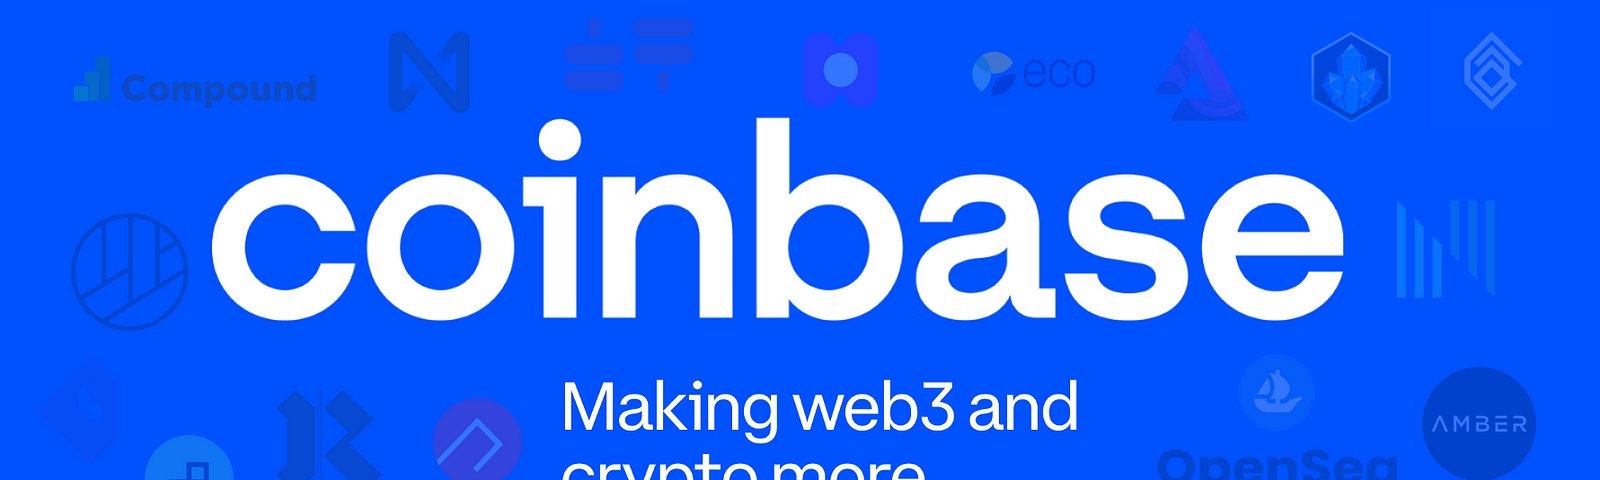 Coinbase has a powerful ecosystem that will define and win the 2020s. This will be the Coinbase decade.